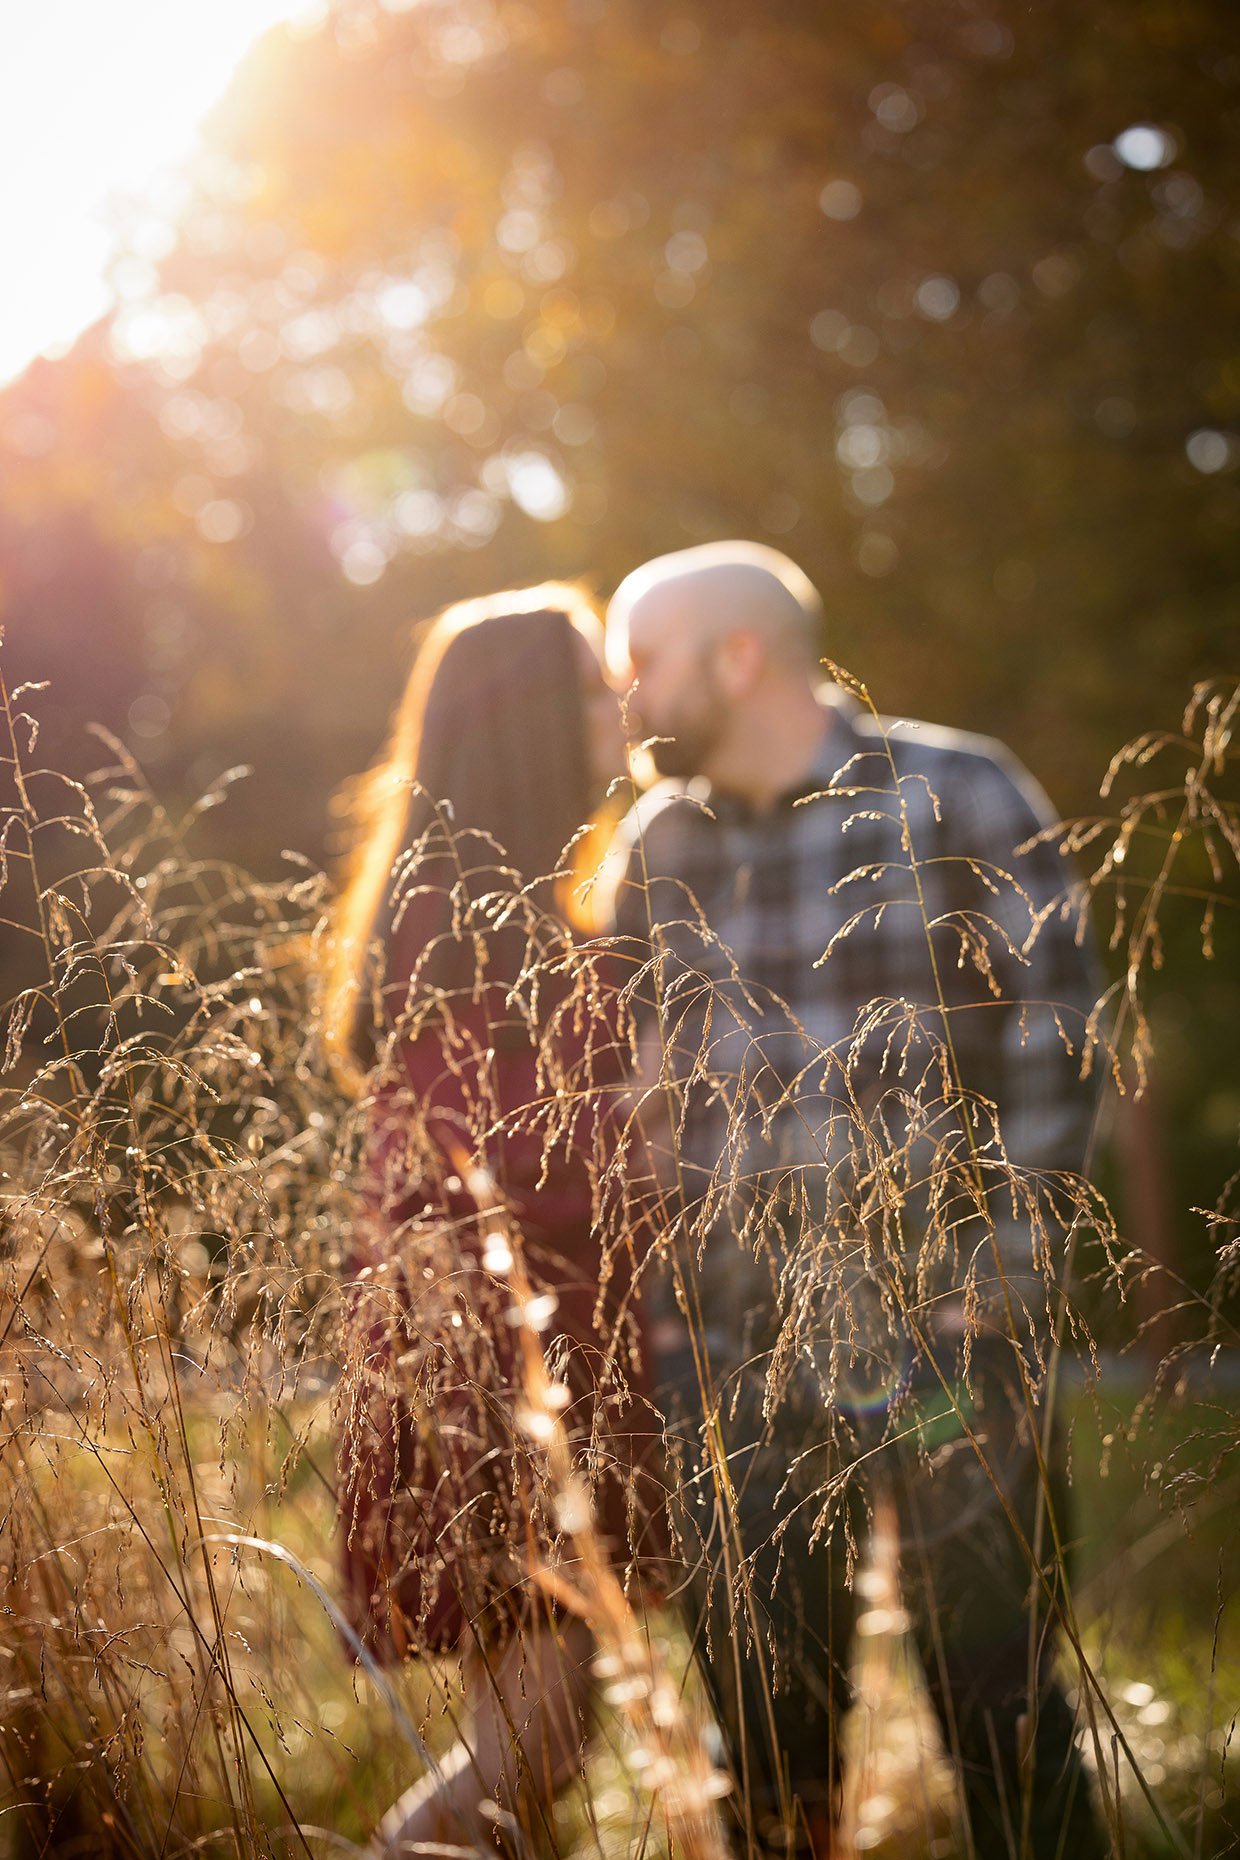 Out of focus photo of couple kissing in grassy field